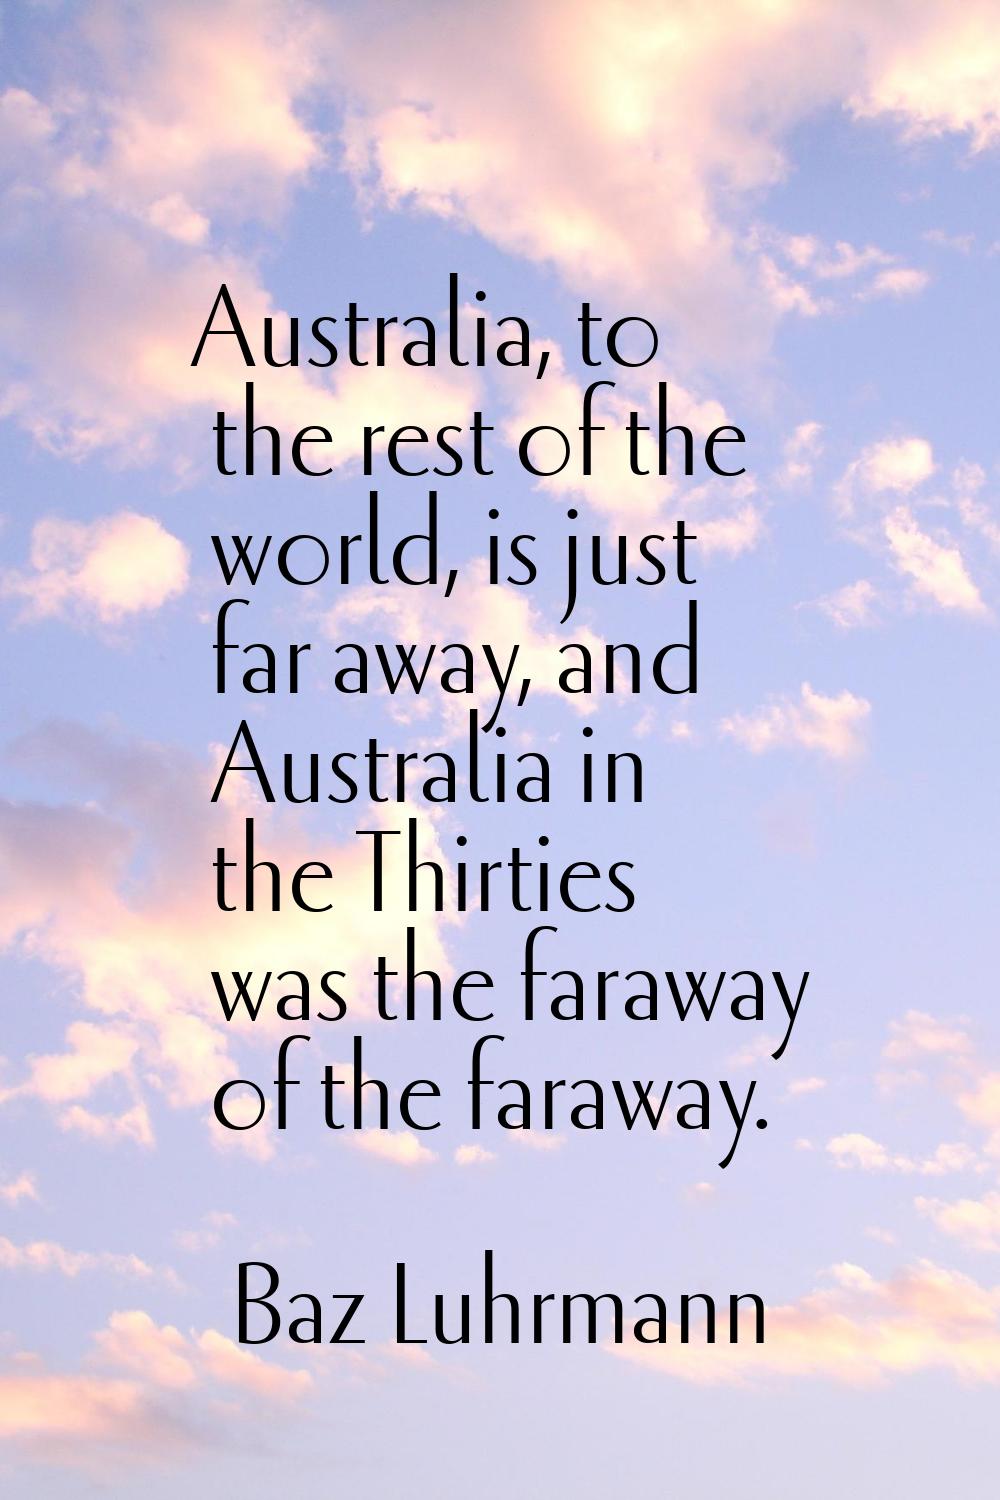 Australia, to the rest of the world, is just far away, and Australia in the Thirties was the farawa